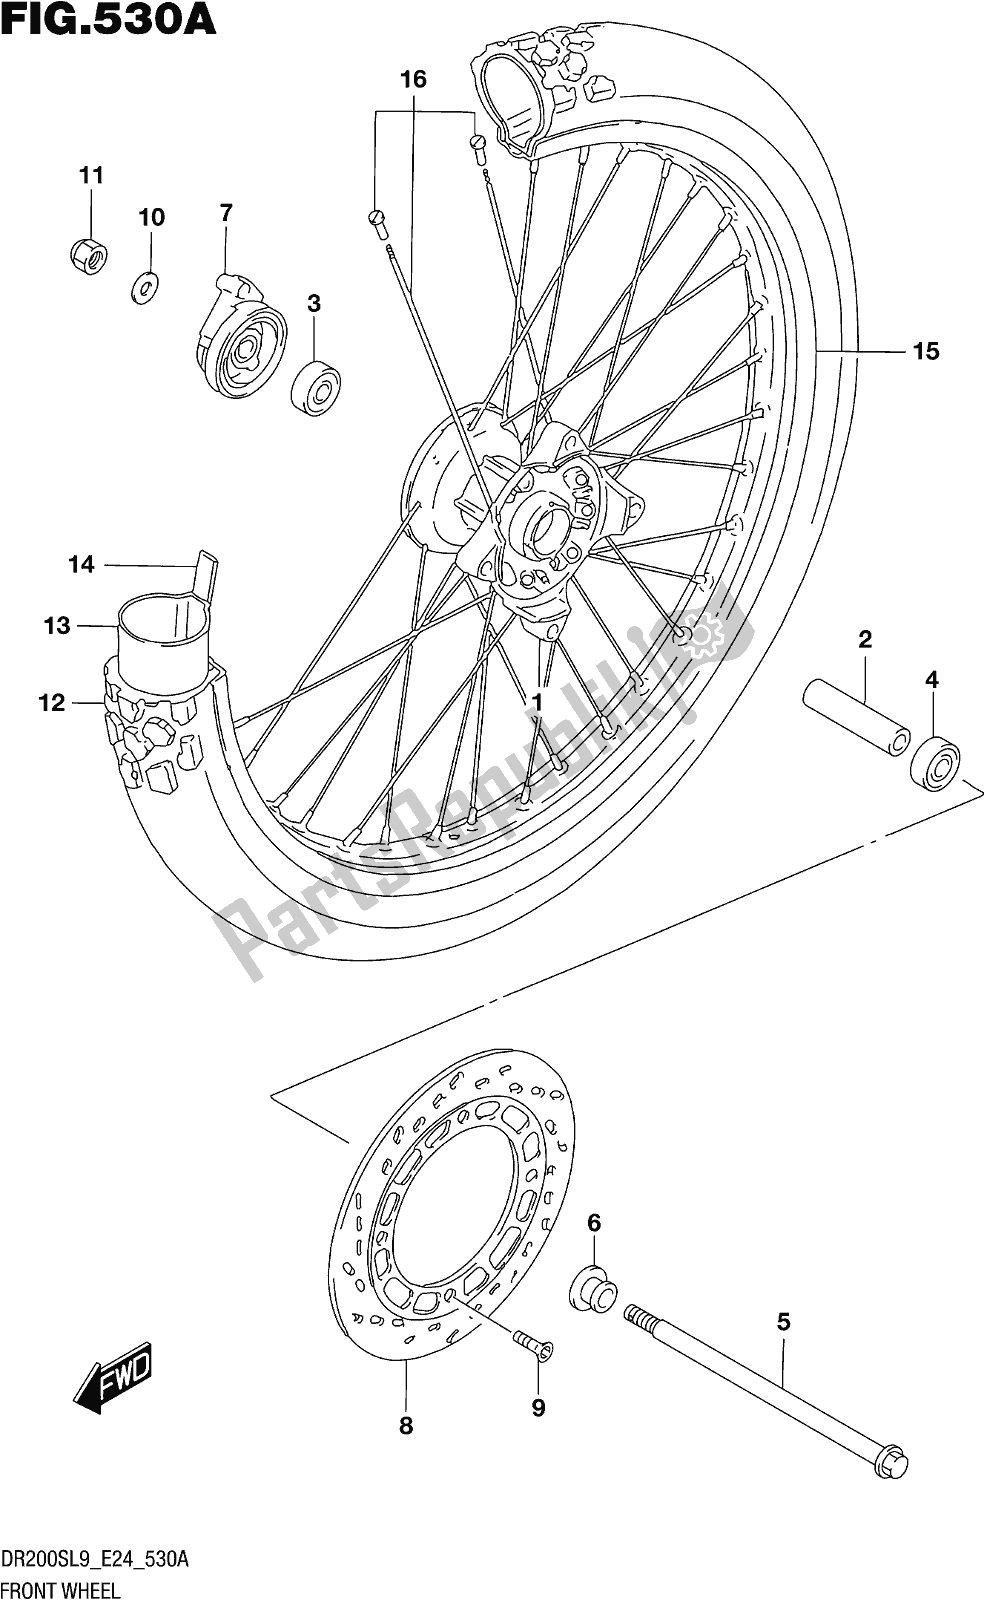 All parts for the Fig. 530a Front Wheel of the Suzuki DR 200S 2019